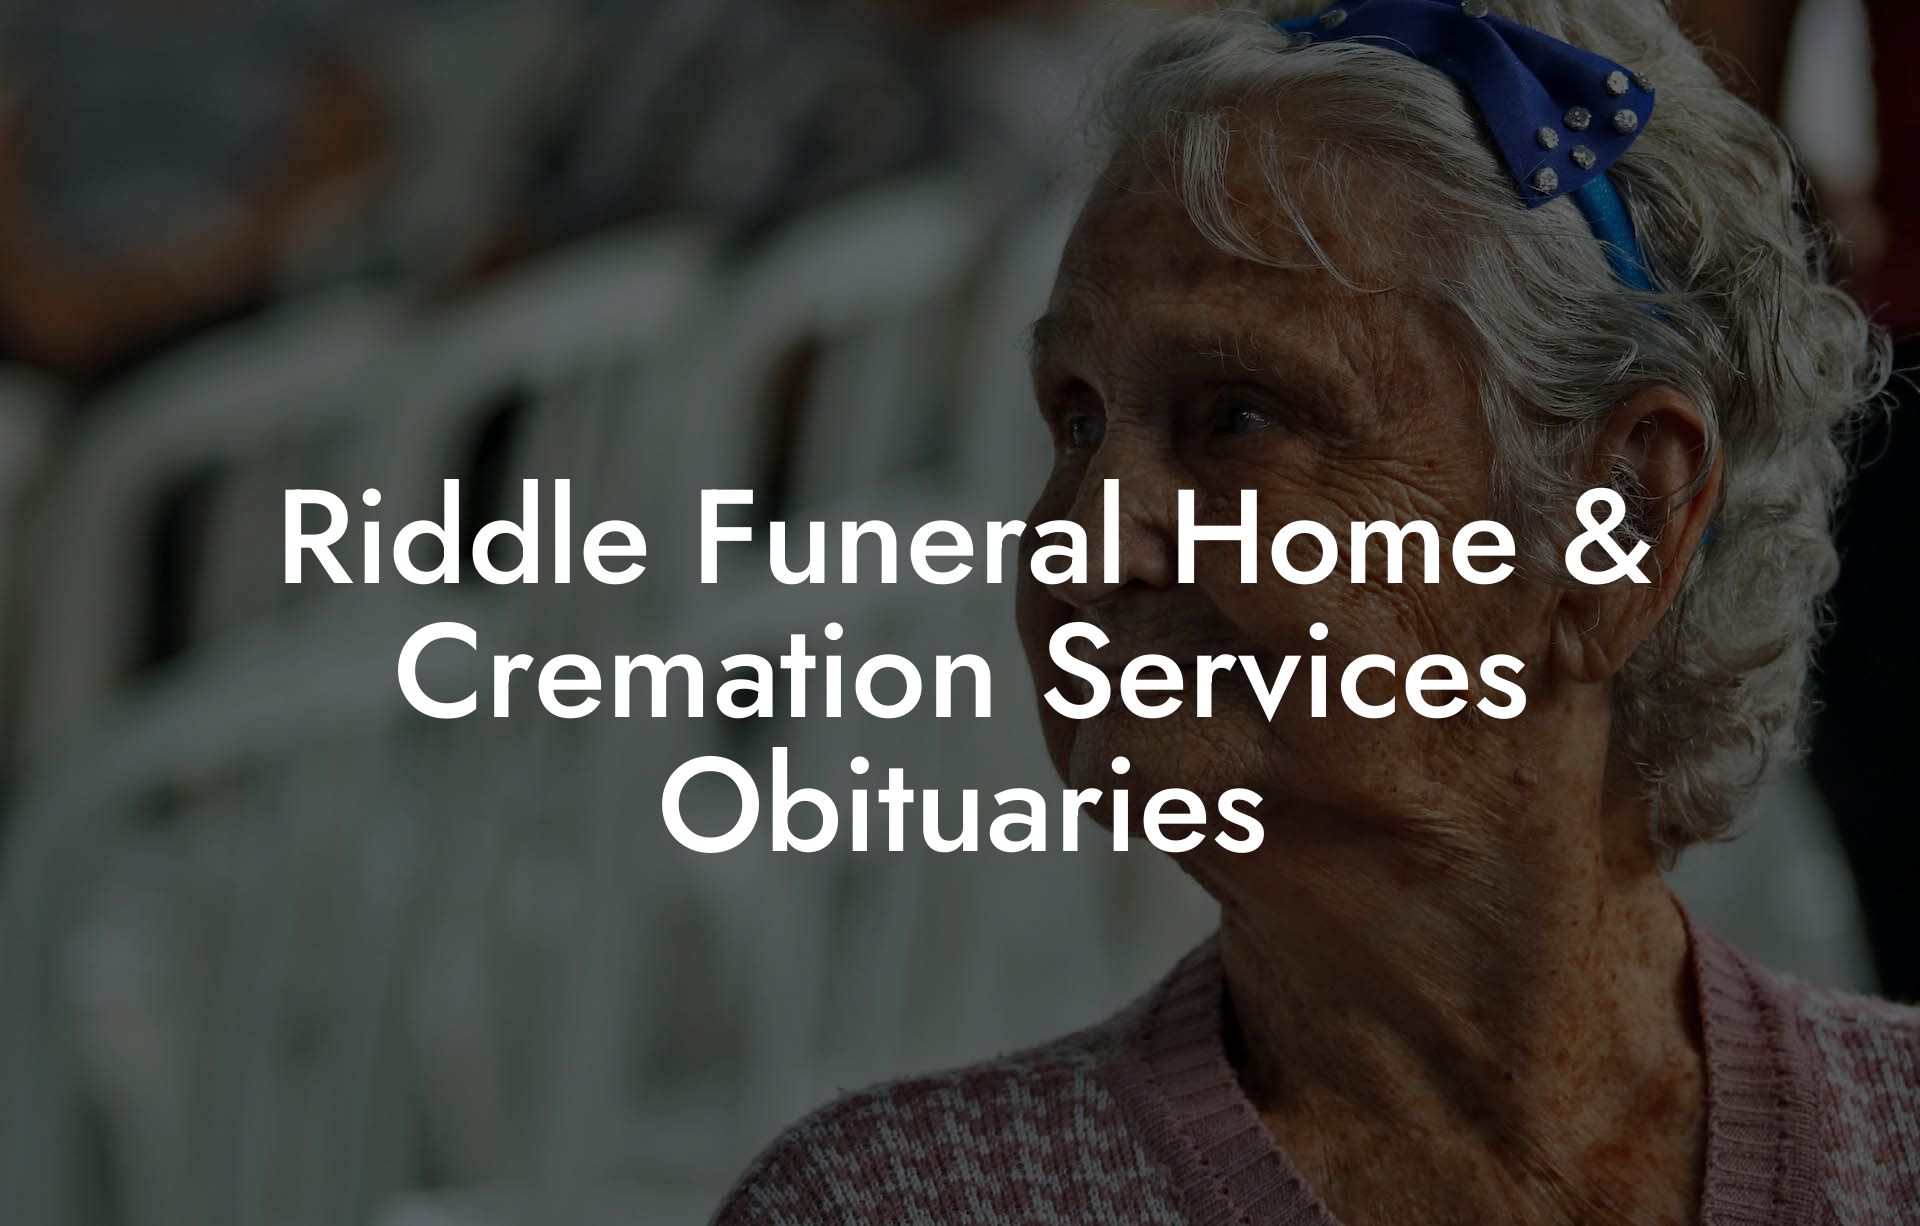 Riddle Funeral Home & Cremation Services Obituaries